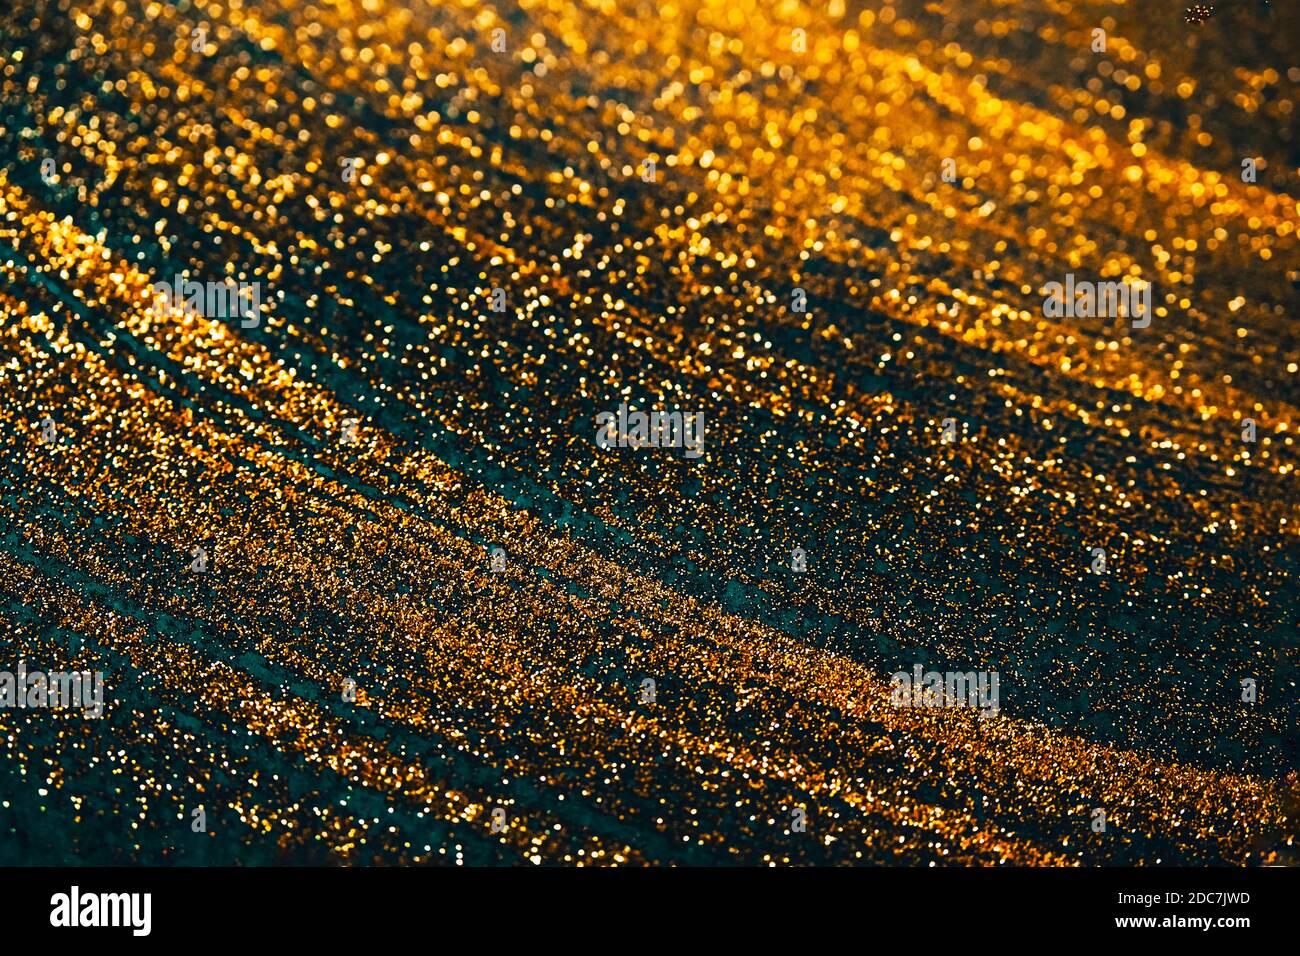 Gold glitter on green bokeh abstract sparkling defocused background.Christmas, New Year's eve, party, celebration concept. Dark springs color. Stock Photo